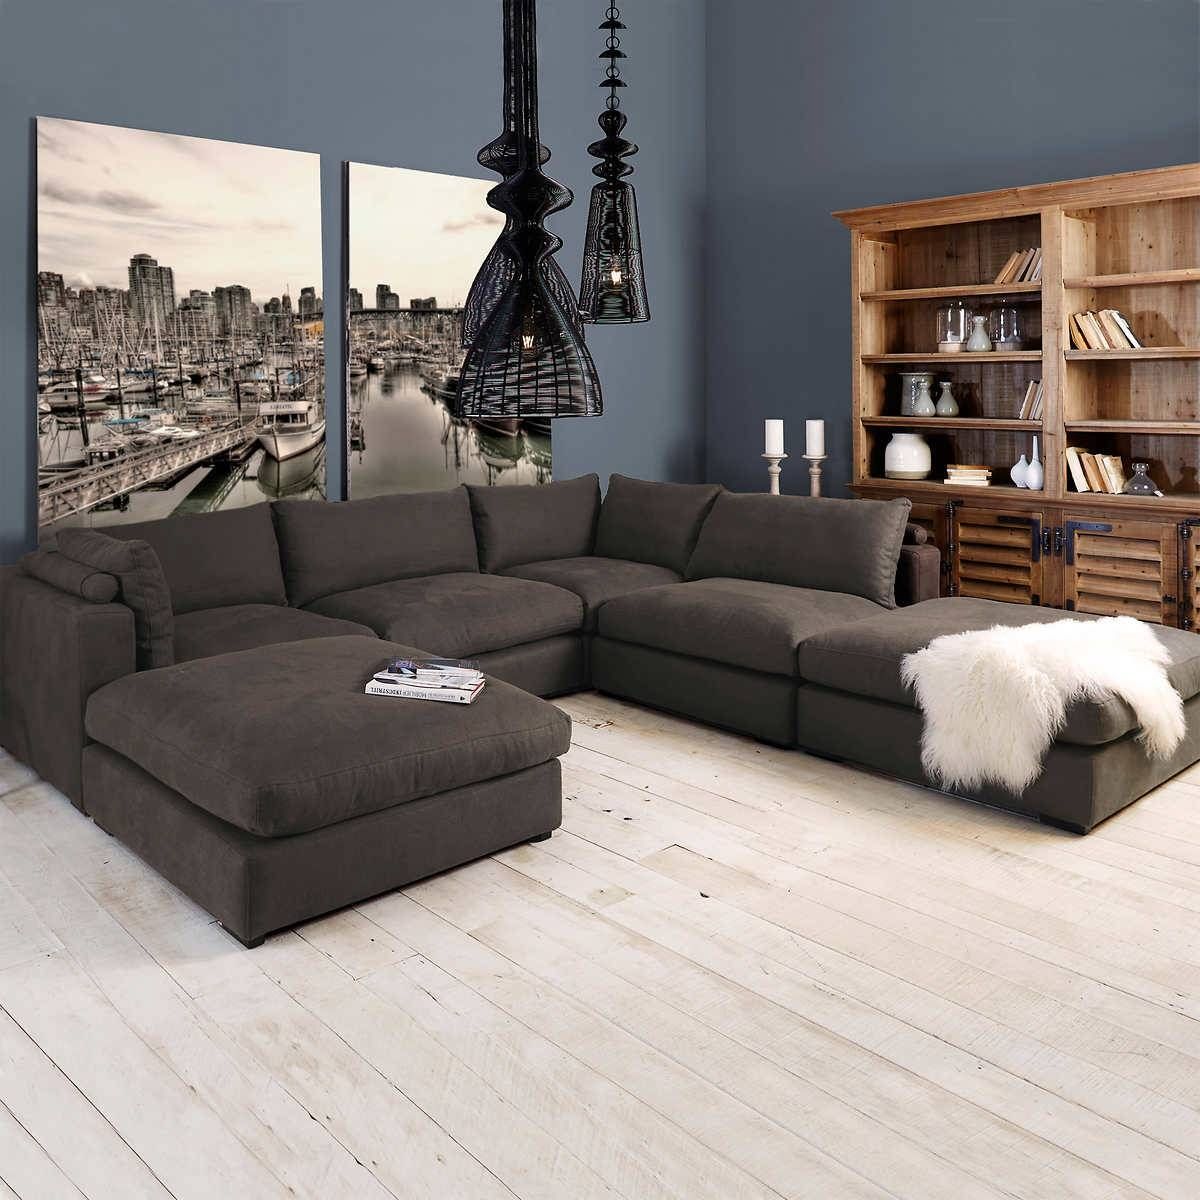 Sofas Center : Modular Sectional Sofa Leather1 900x700 Free Pertaining To Leather Modular Sectional Sofas (View 4 of 30)